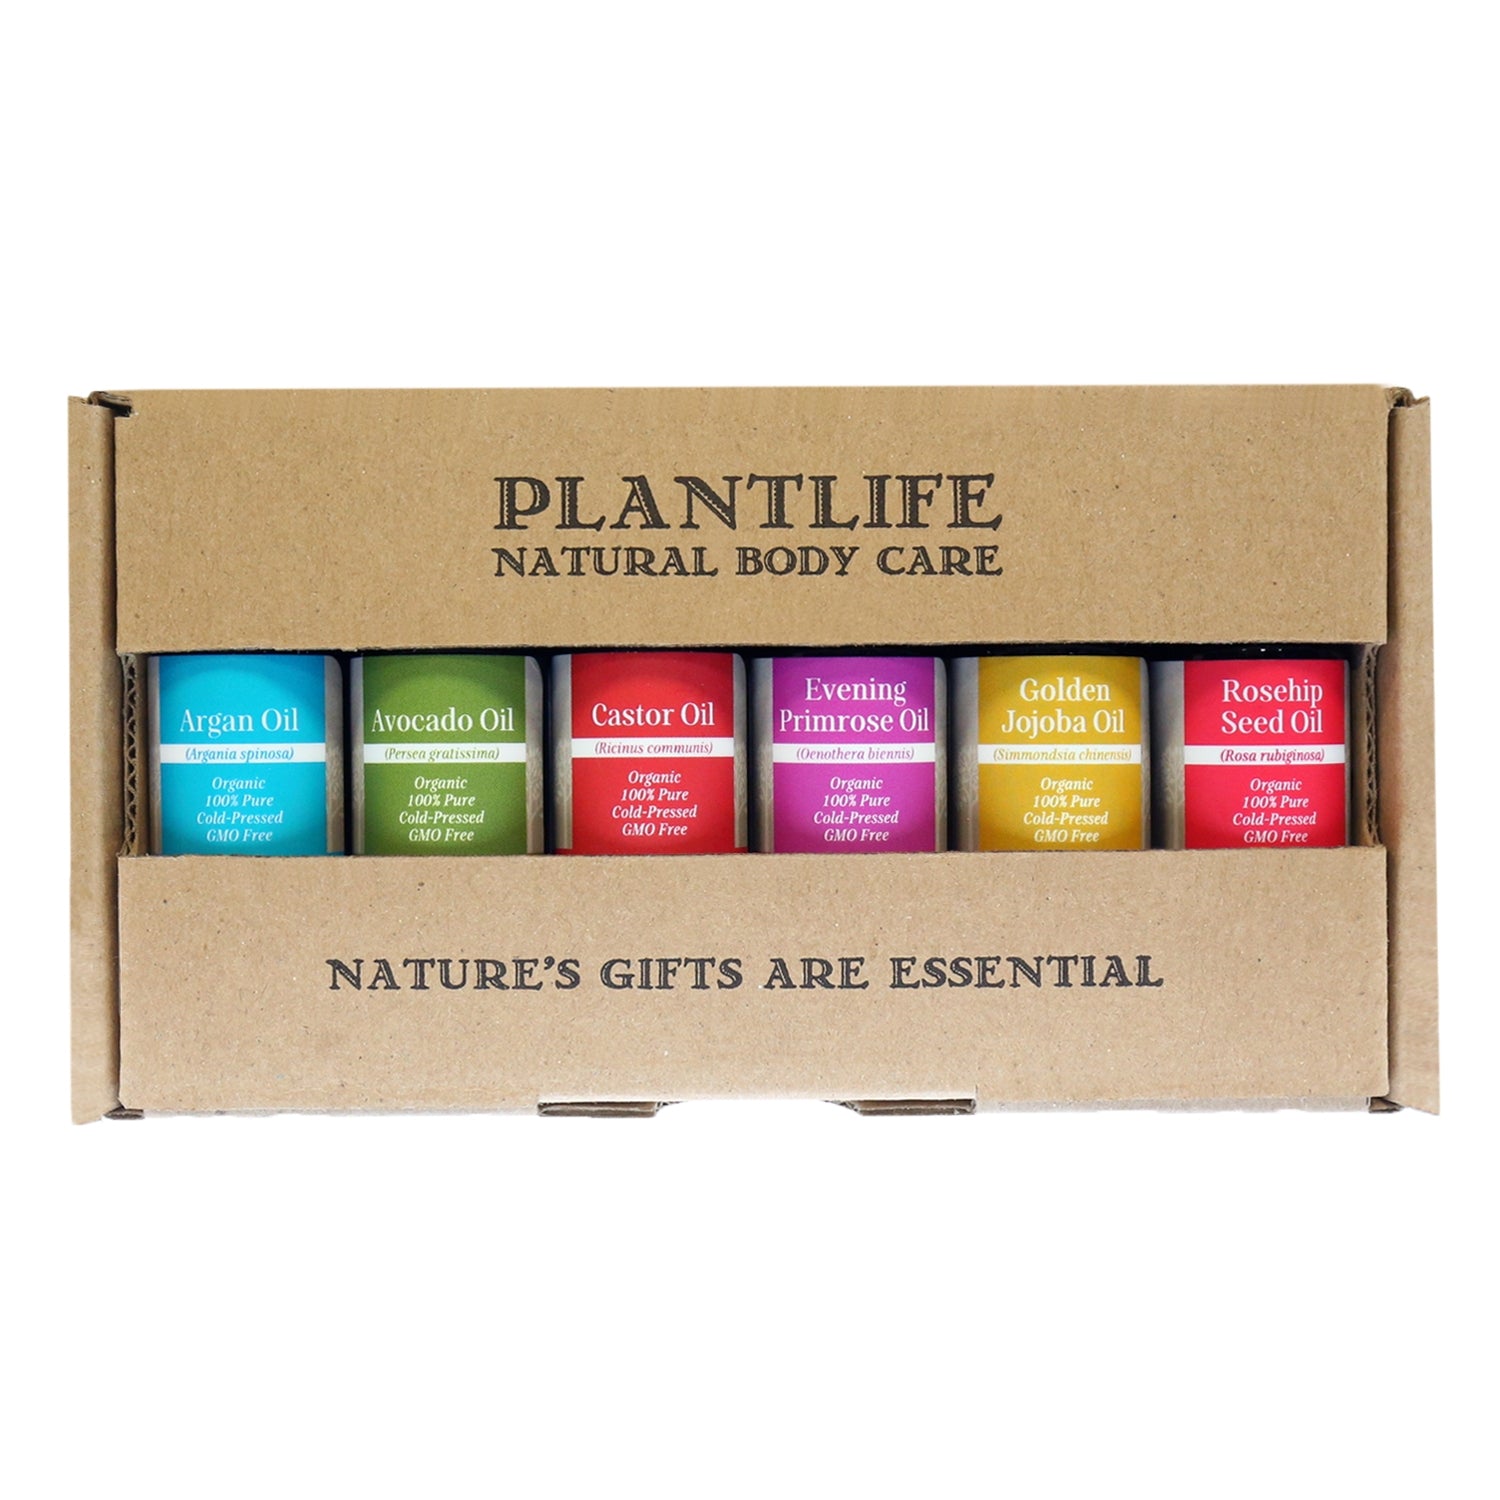 Create Your Own Carrier Oil 10ml 6 Pack – Plantlife